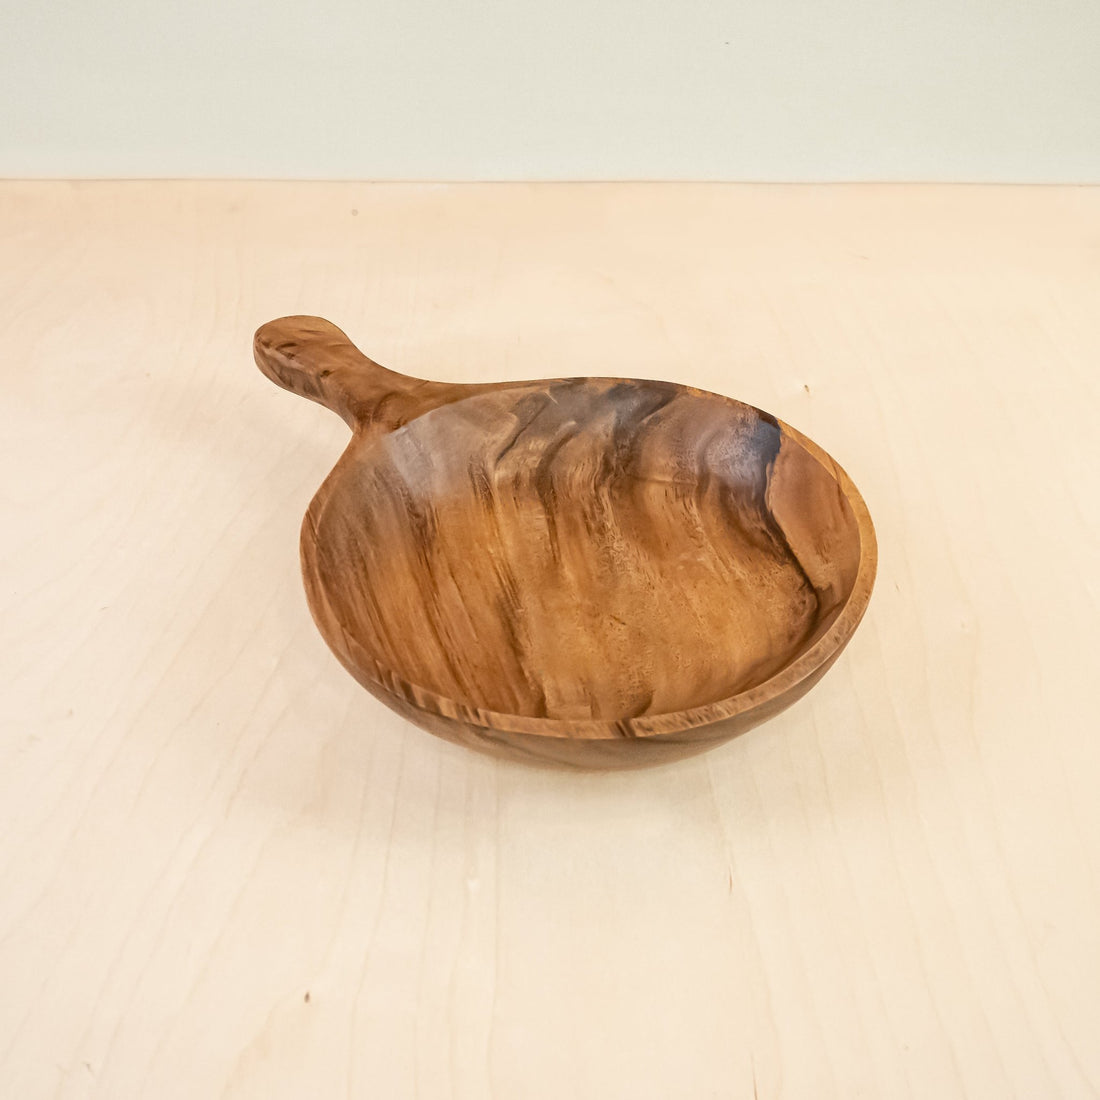 Serving Tray - Round Serving Tray with Handles - Acacia Wood | LIKHÂ - LIKHÂ